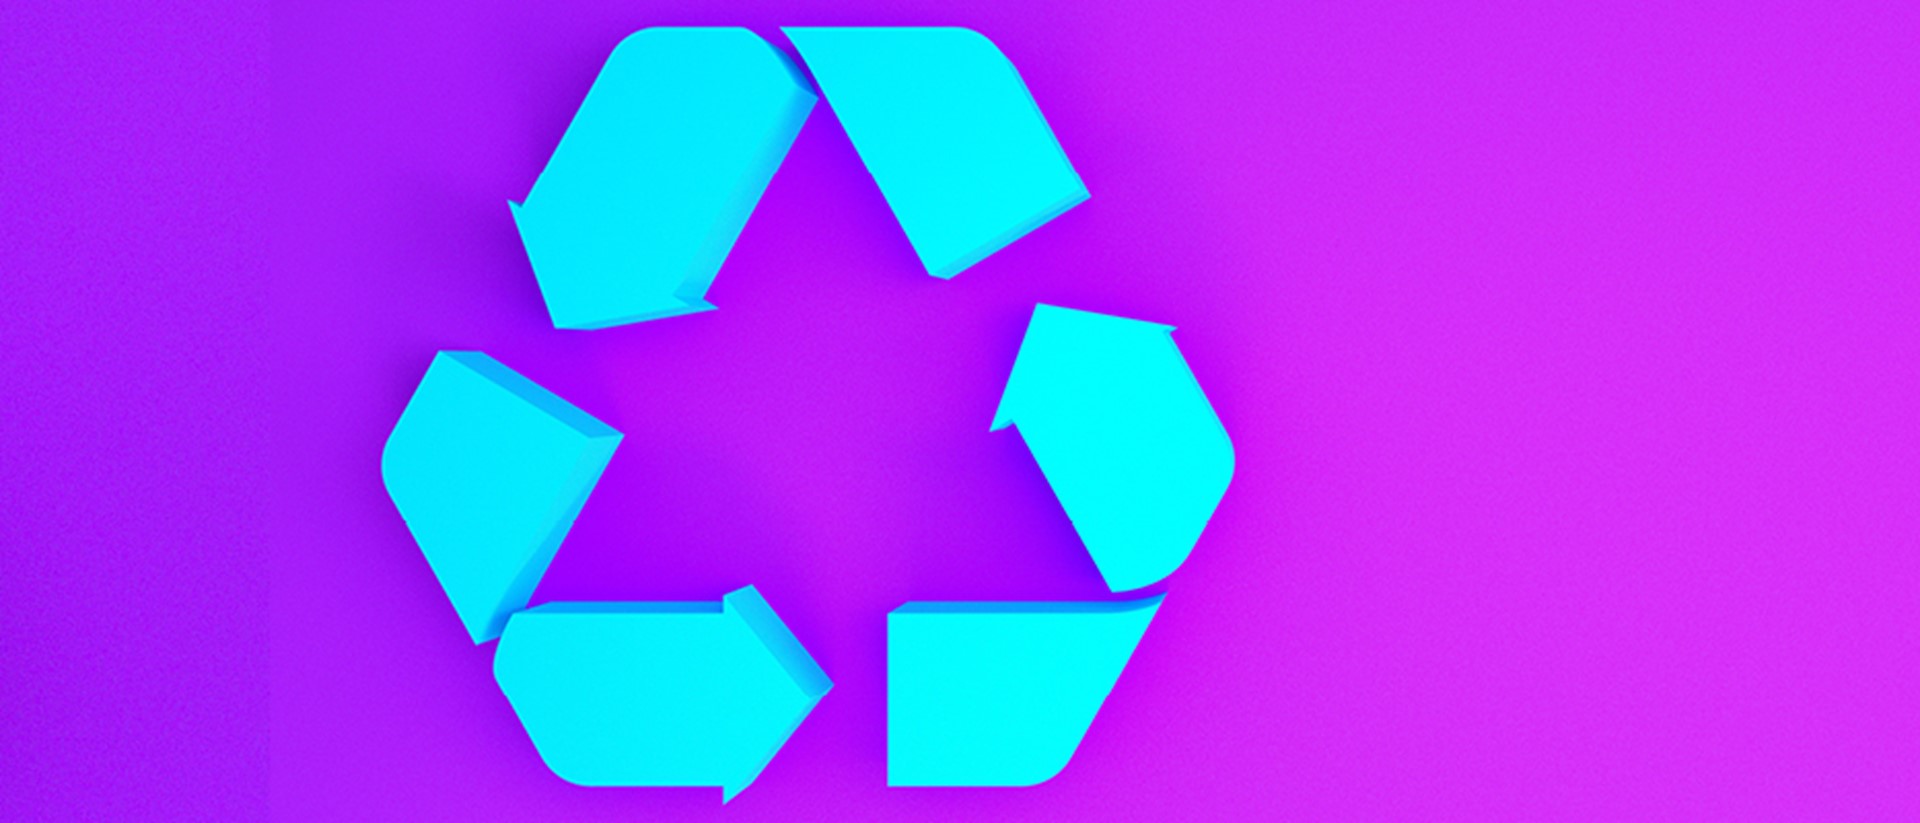 Image of a blue recycling logo on a purple background